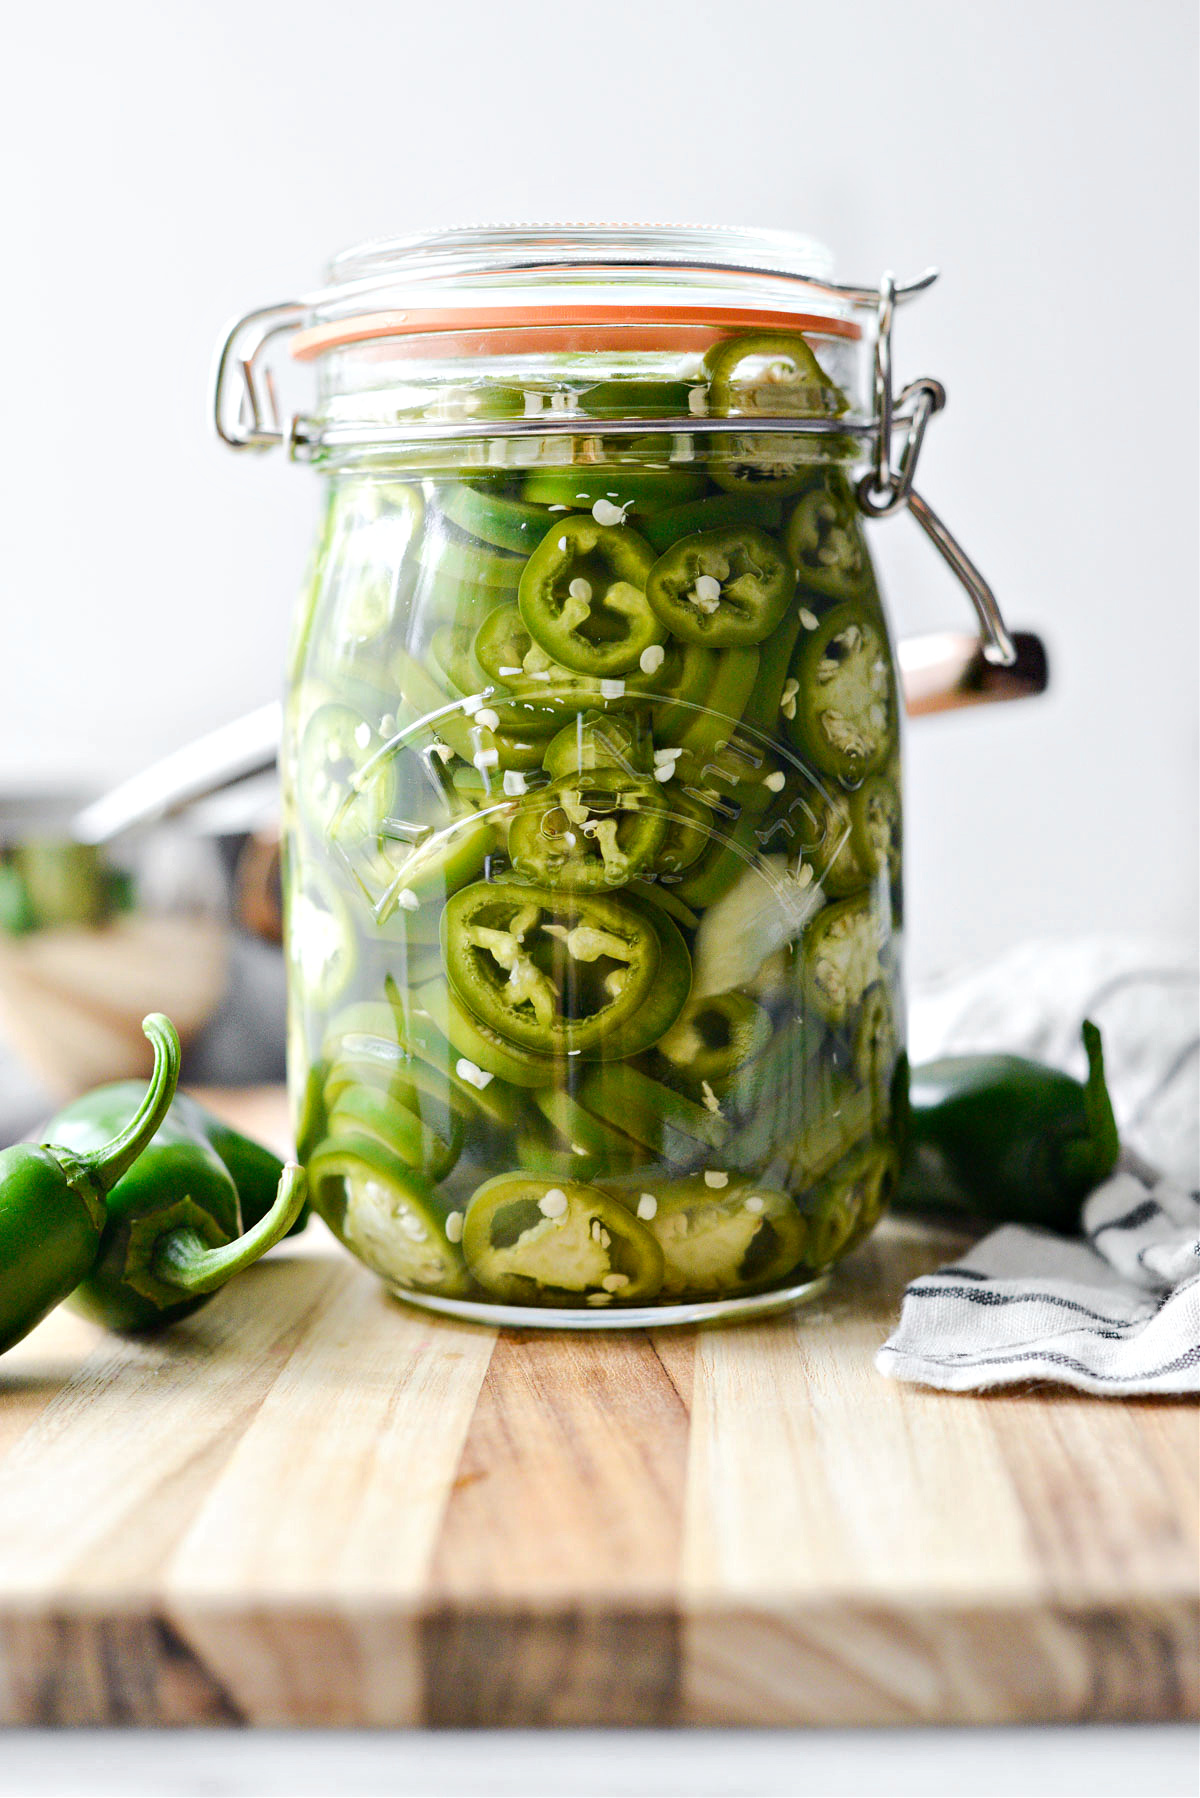 https://www.simplyscratch.com/wp-content/uploads/2022/07/Easy-Homemade-Pickled-Jalapenos-l-SimplyScratch-23.jpg